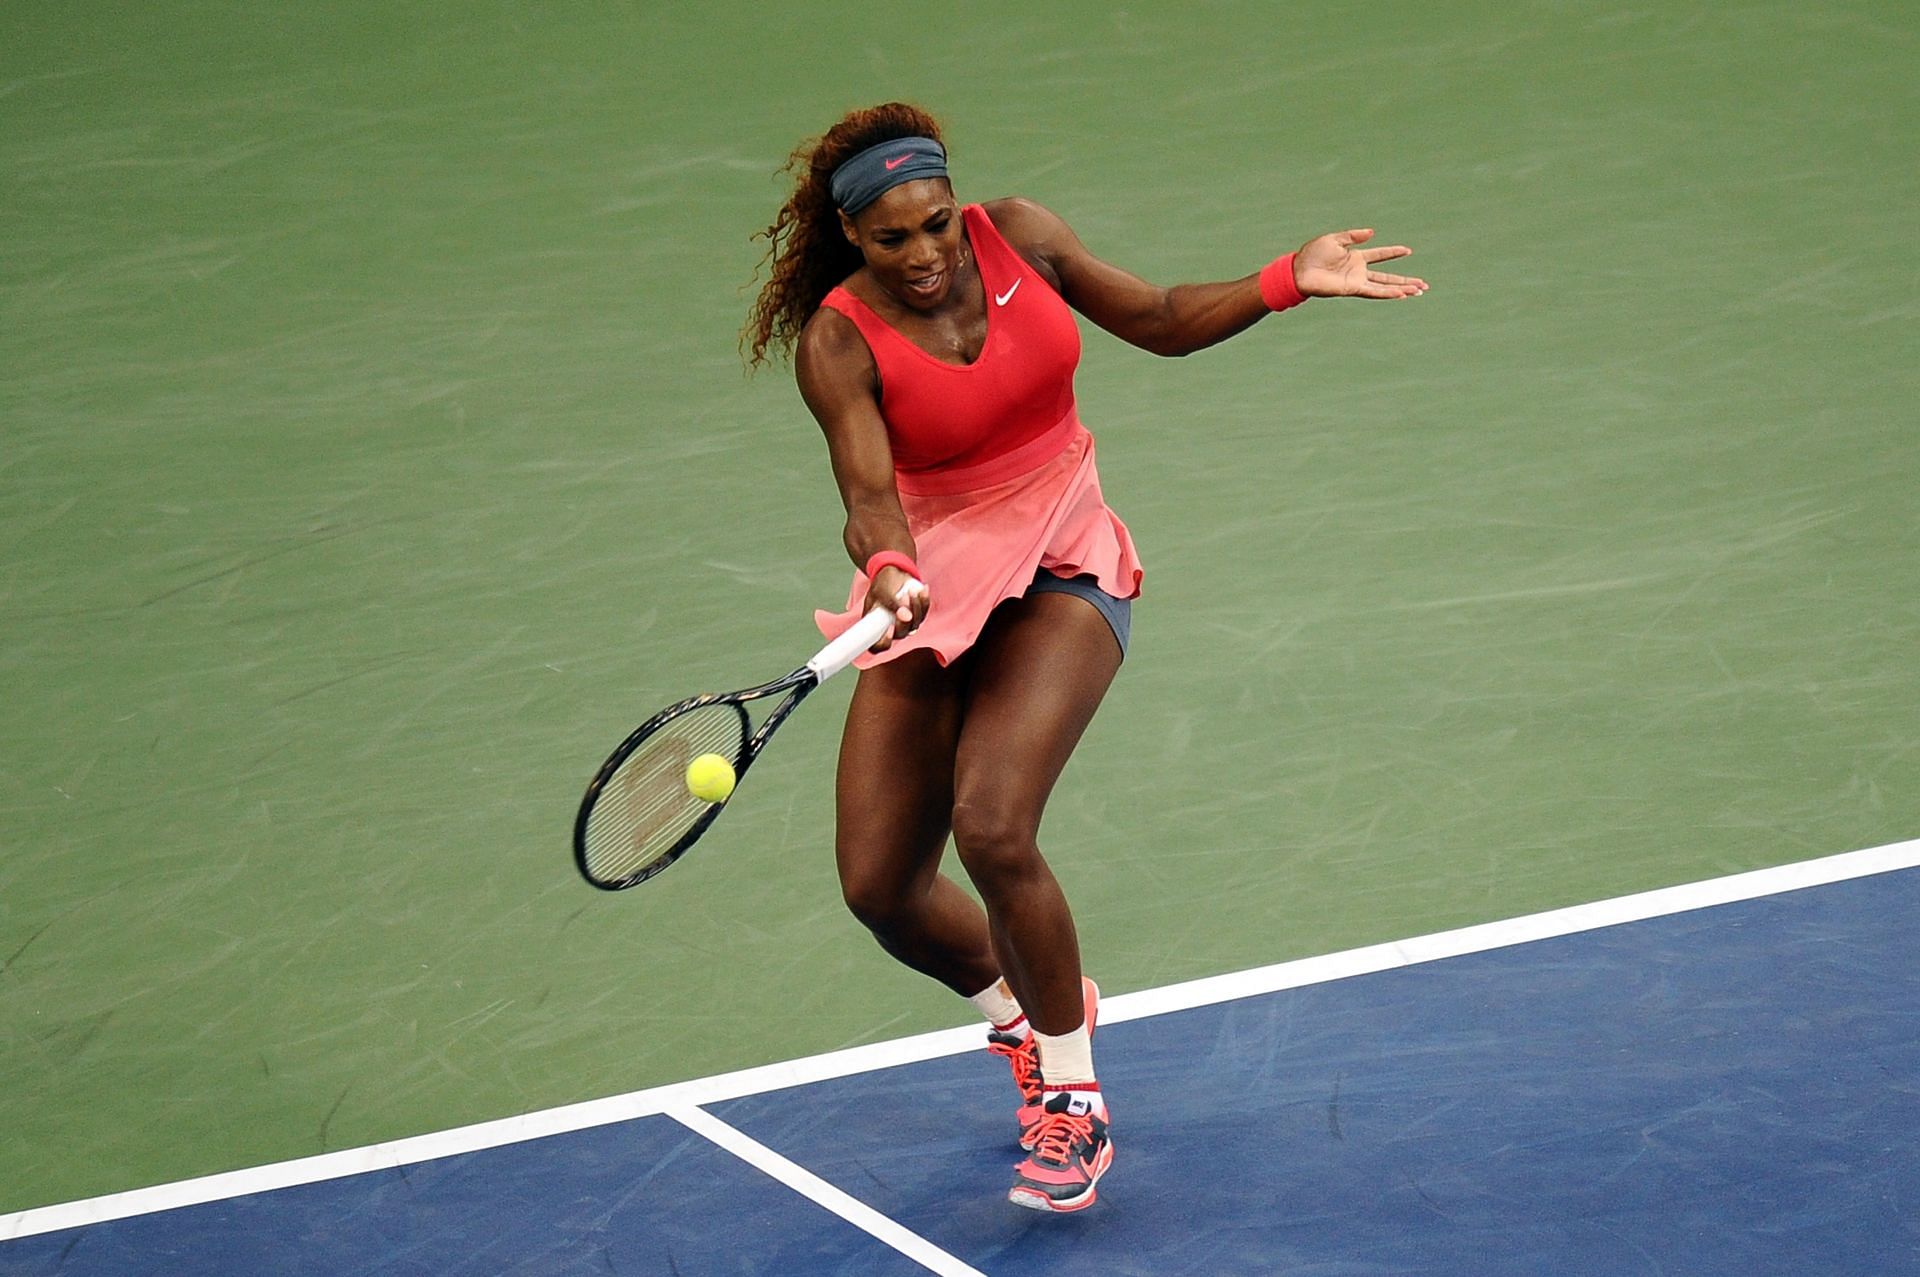 Serena Williams last won the US Open title in 2014